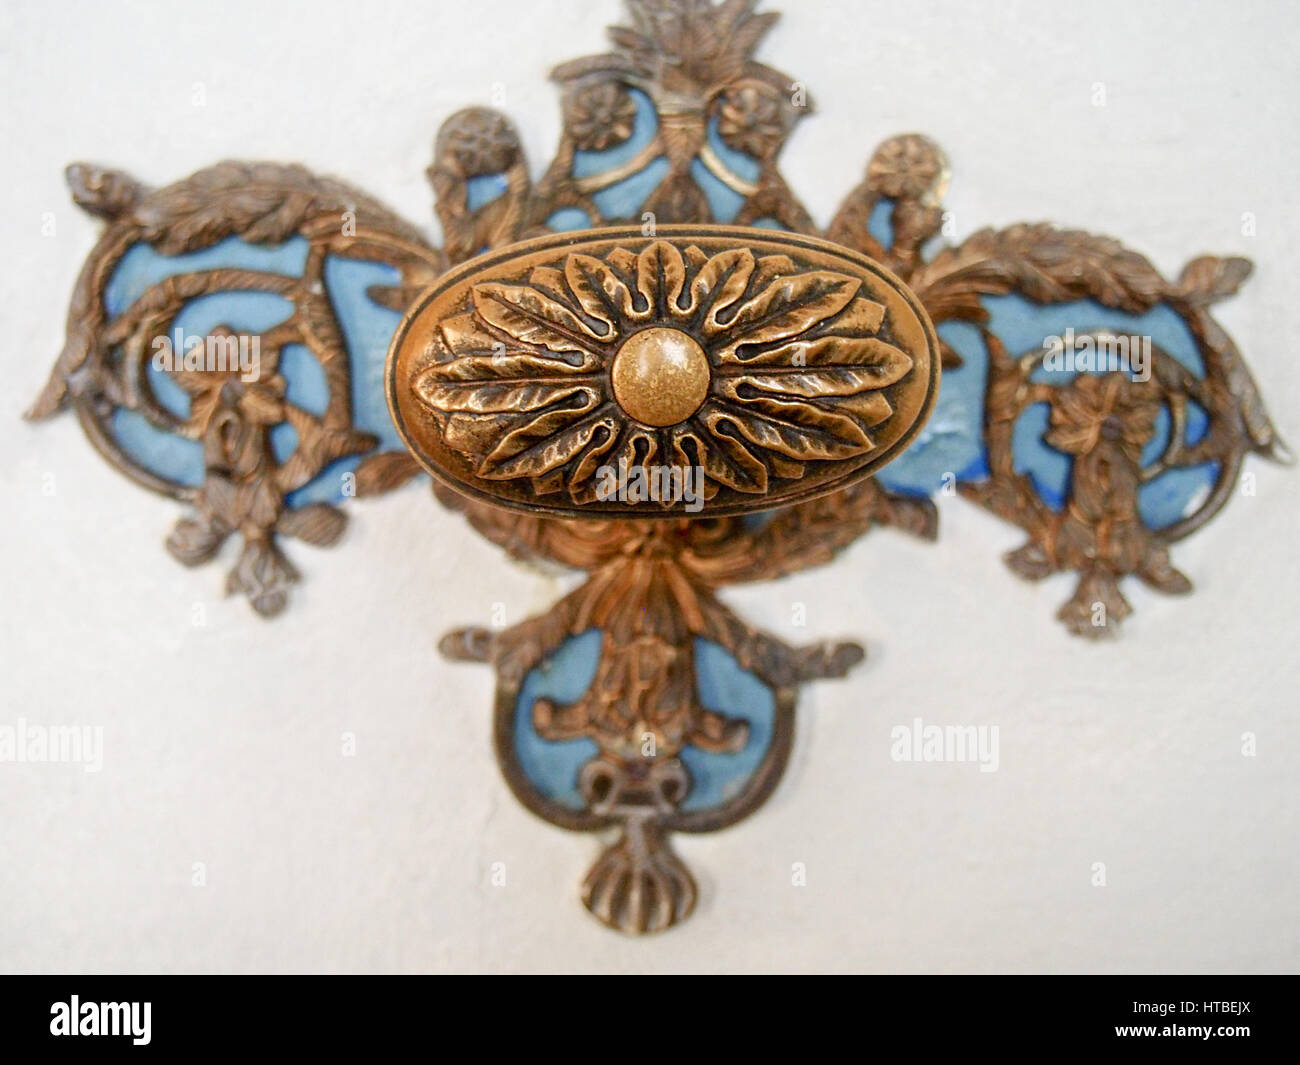 Detail of a decorative doorknob with blue and copper color. Stock Photo